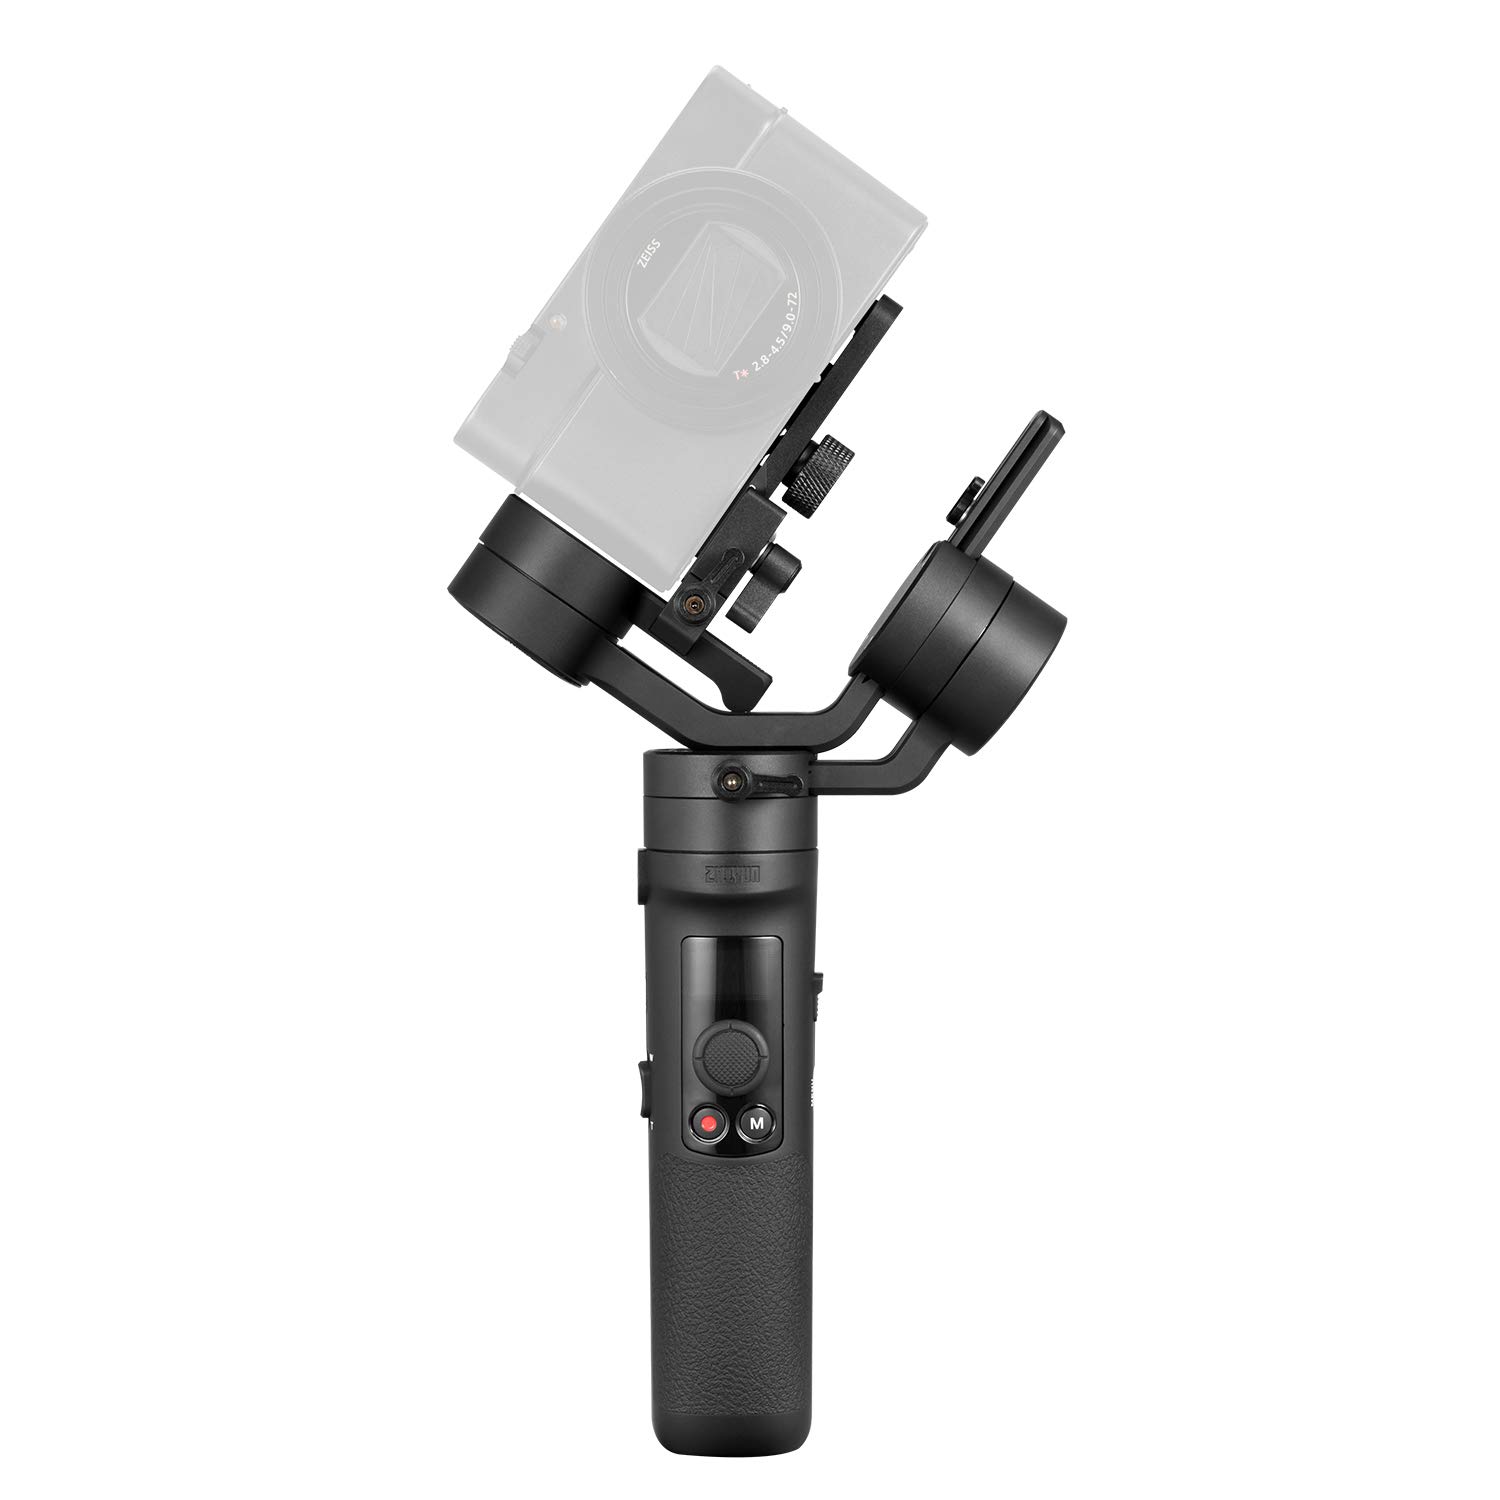 ZHIYUN Crane M2 3-Axis Gimbal Stabilizer for Light Mirrorless Camera,Action Camera,Smartphone,for Sony A6000,A6300,A6500,RX100M,GX85,Gopro Hero 5/6/7,iPhone Xs XR,WiFi/Bluetooth Control,720g Payload